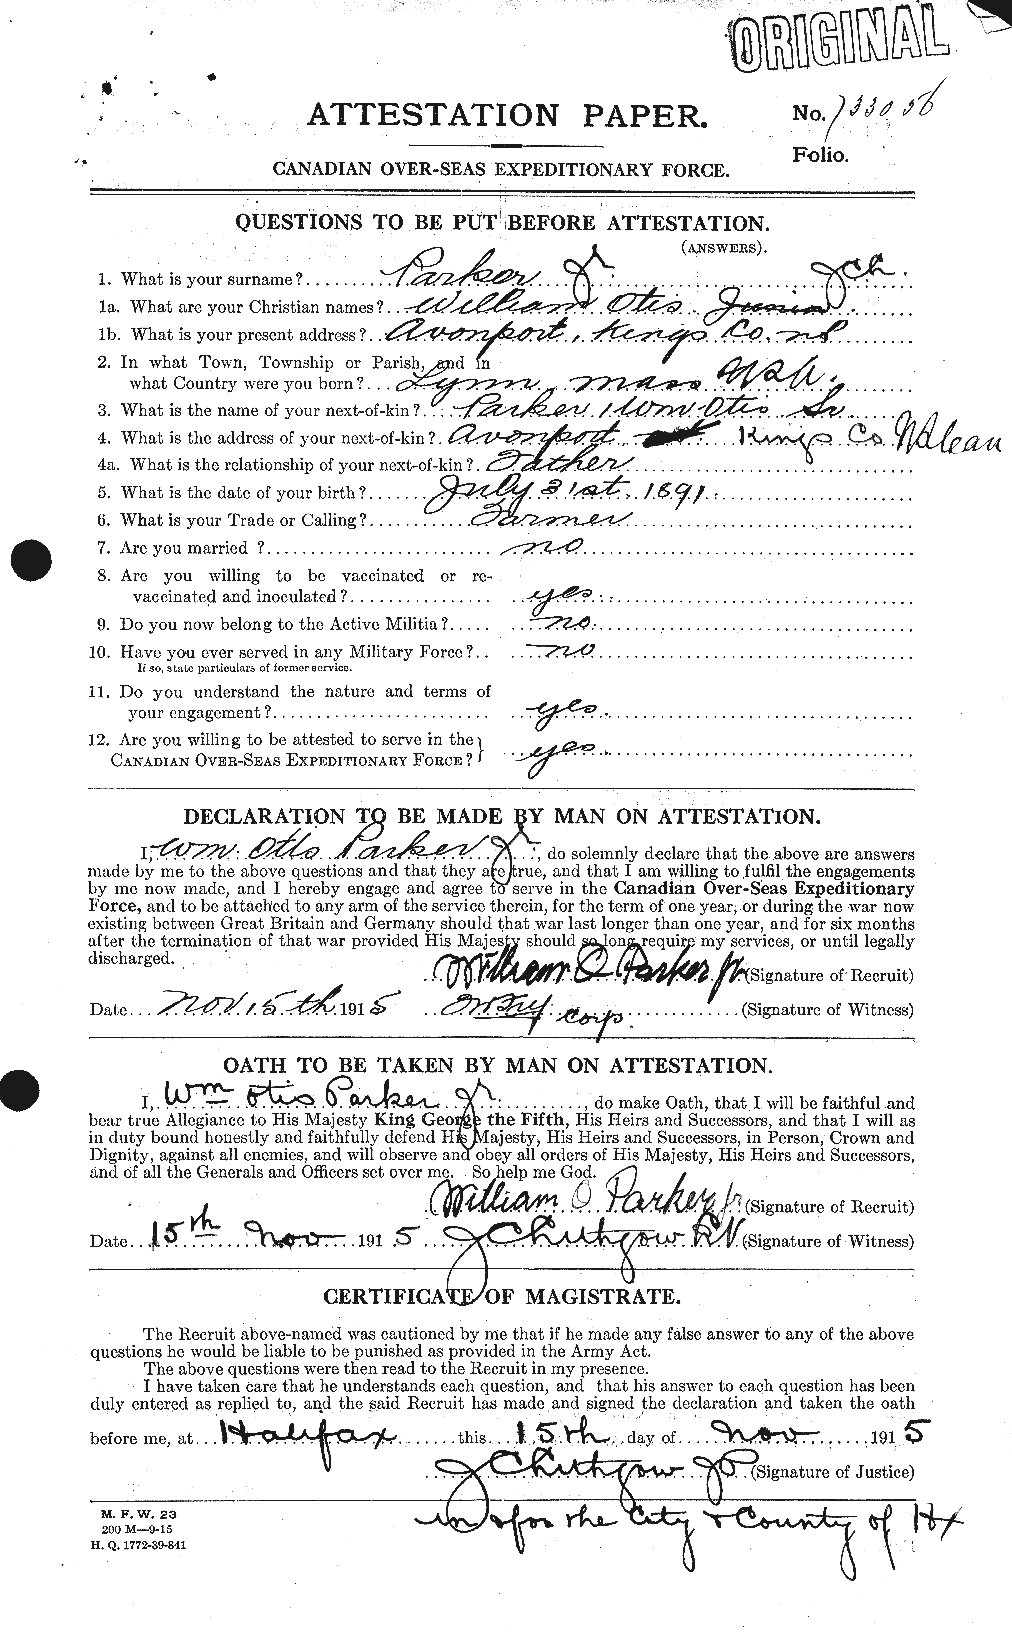 Personnel Records of the First World War - CEF 565779a